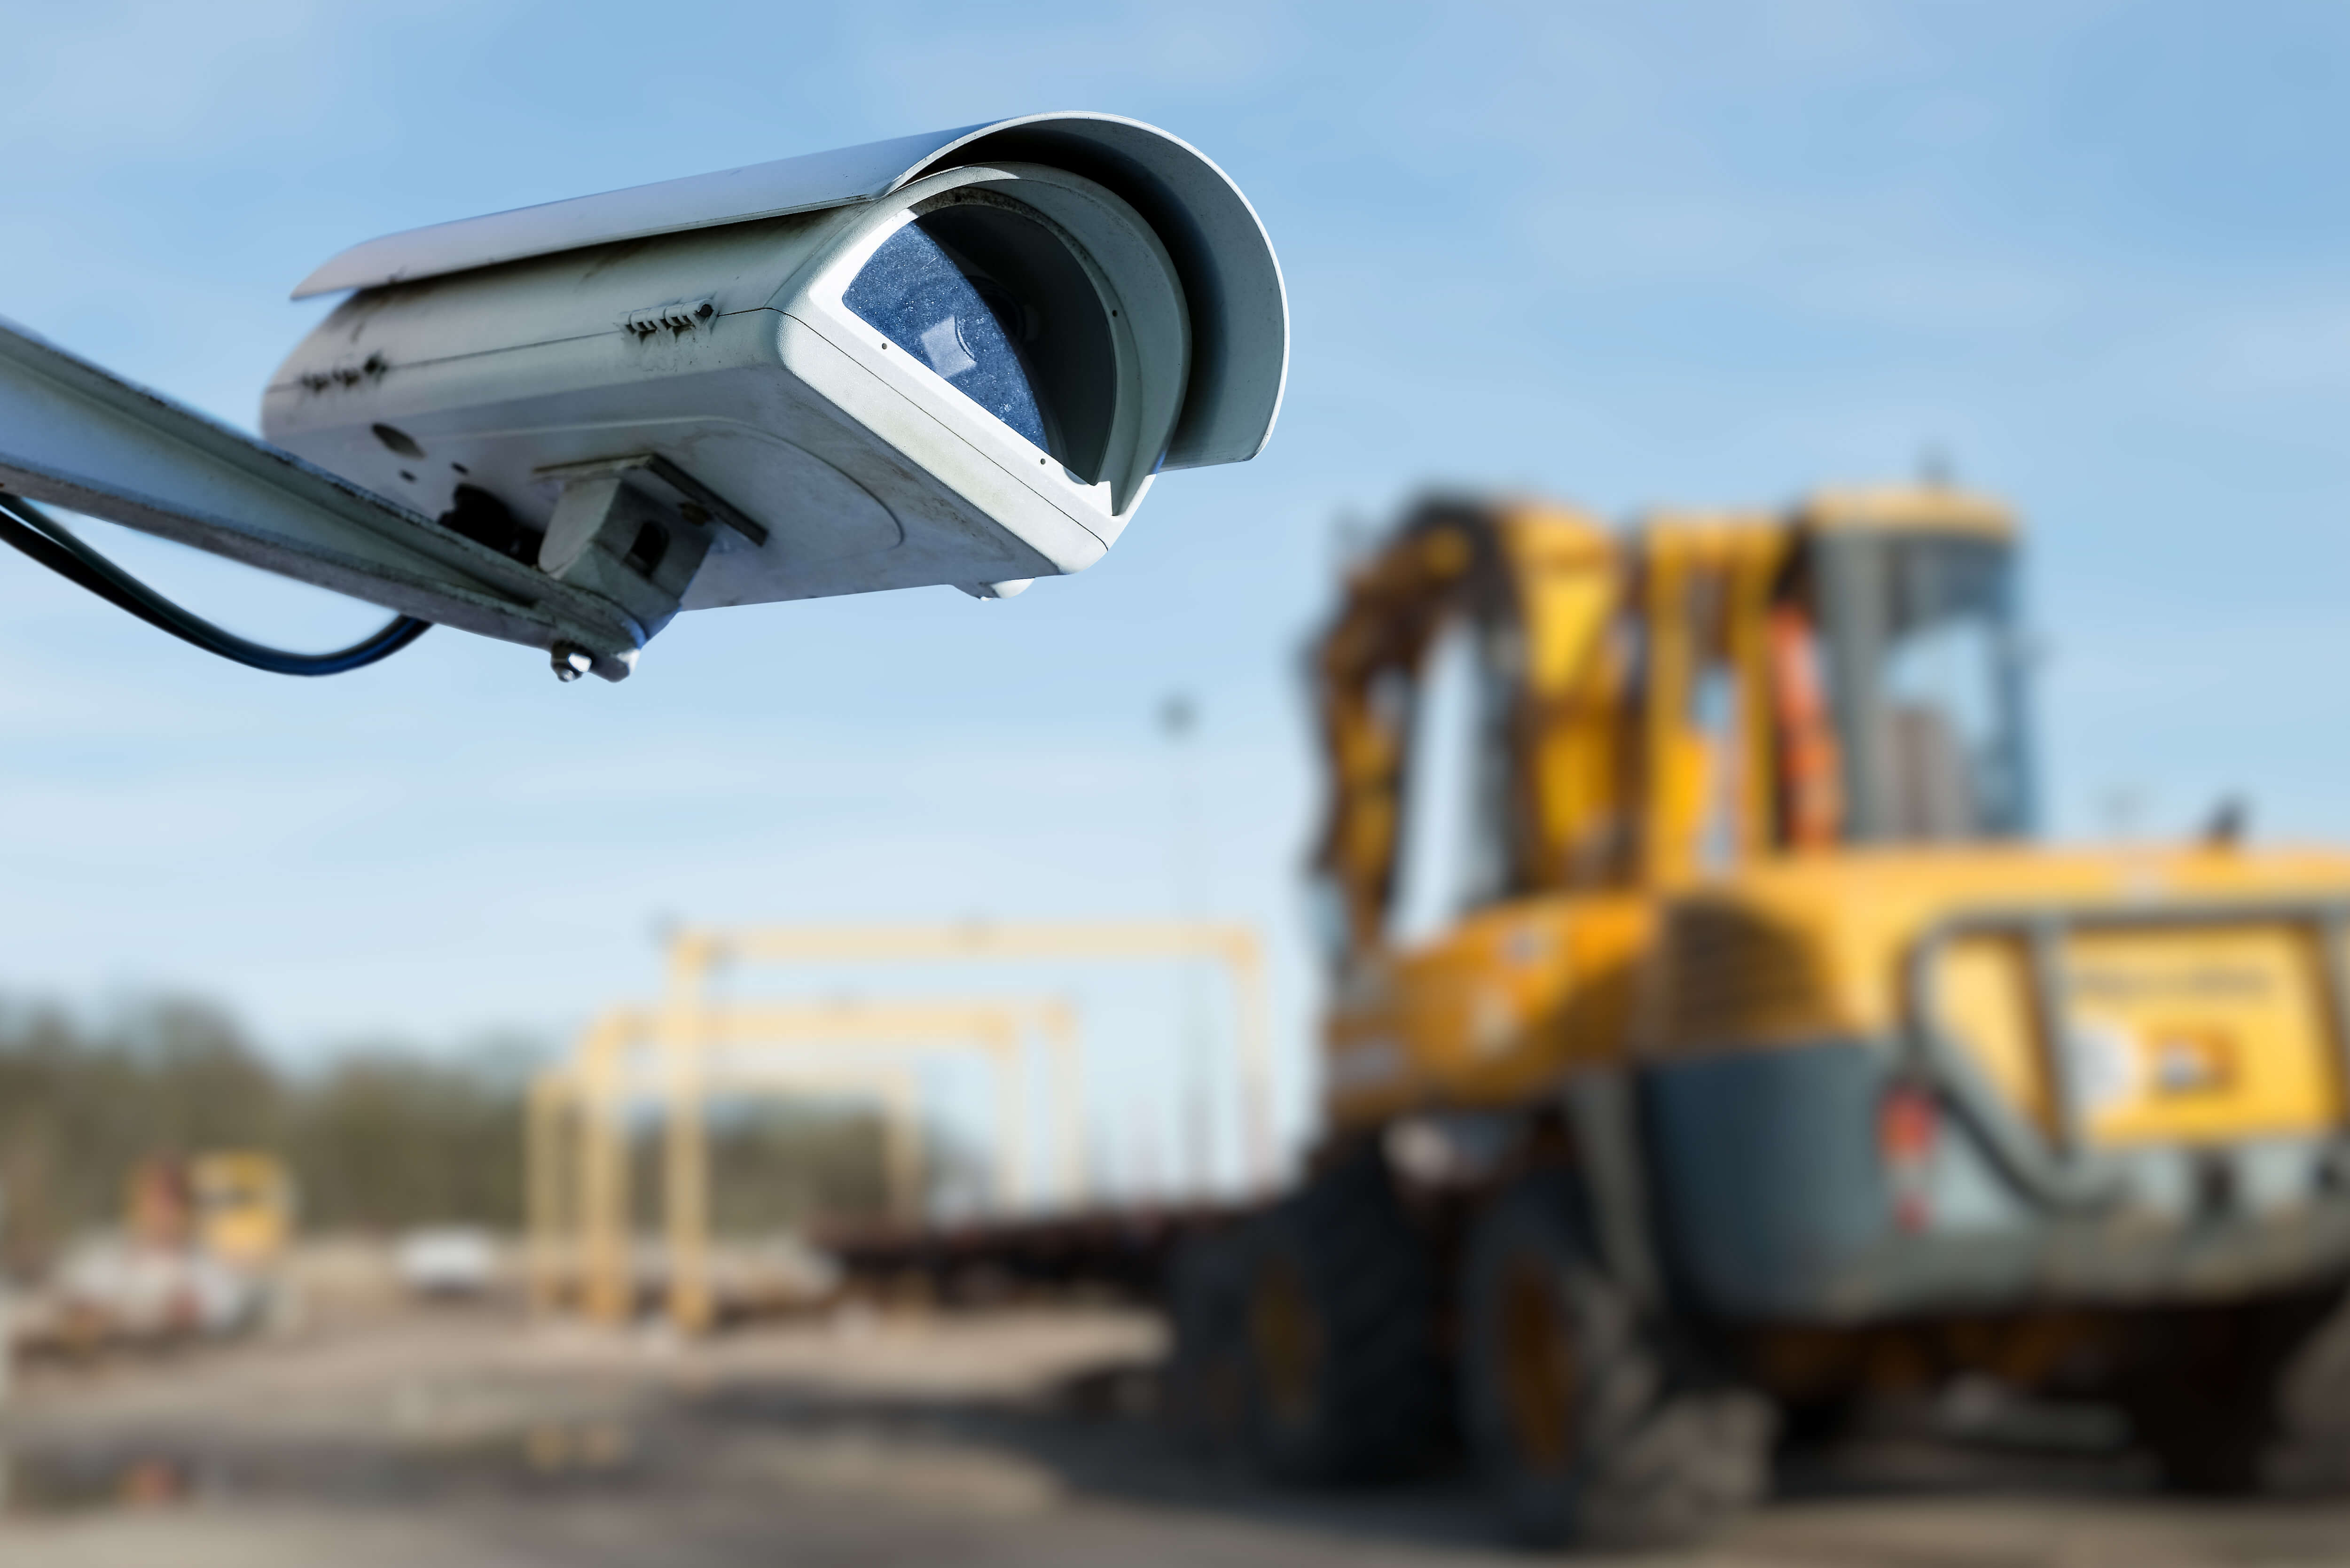 Advice to protect your construction site from theft